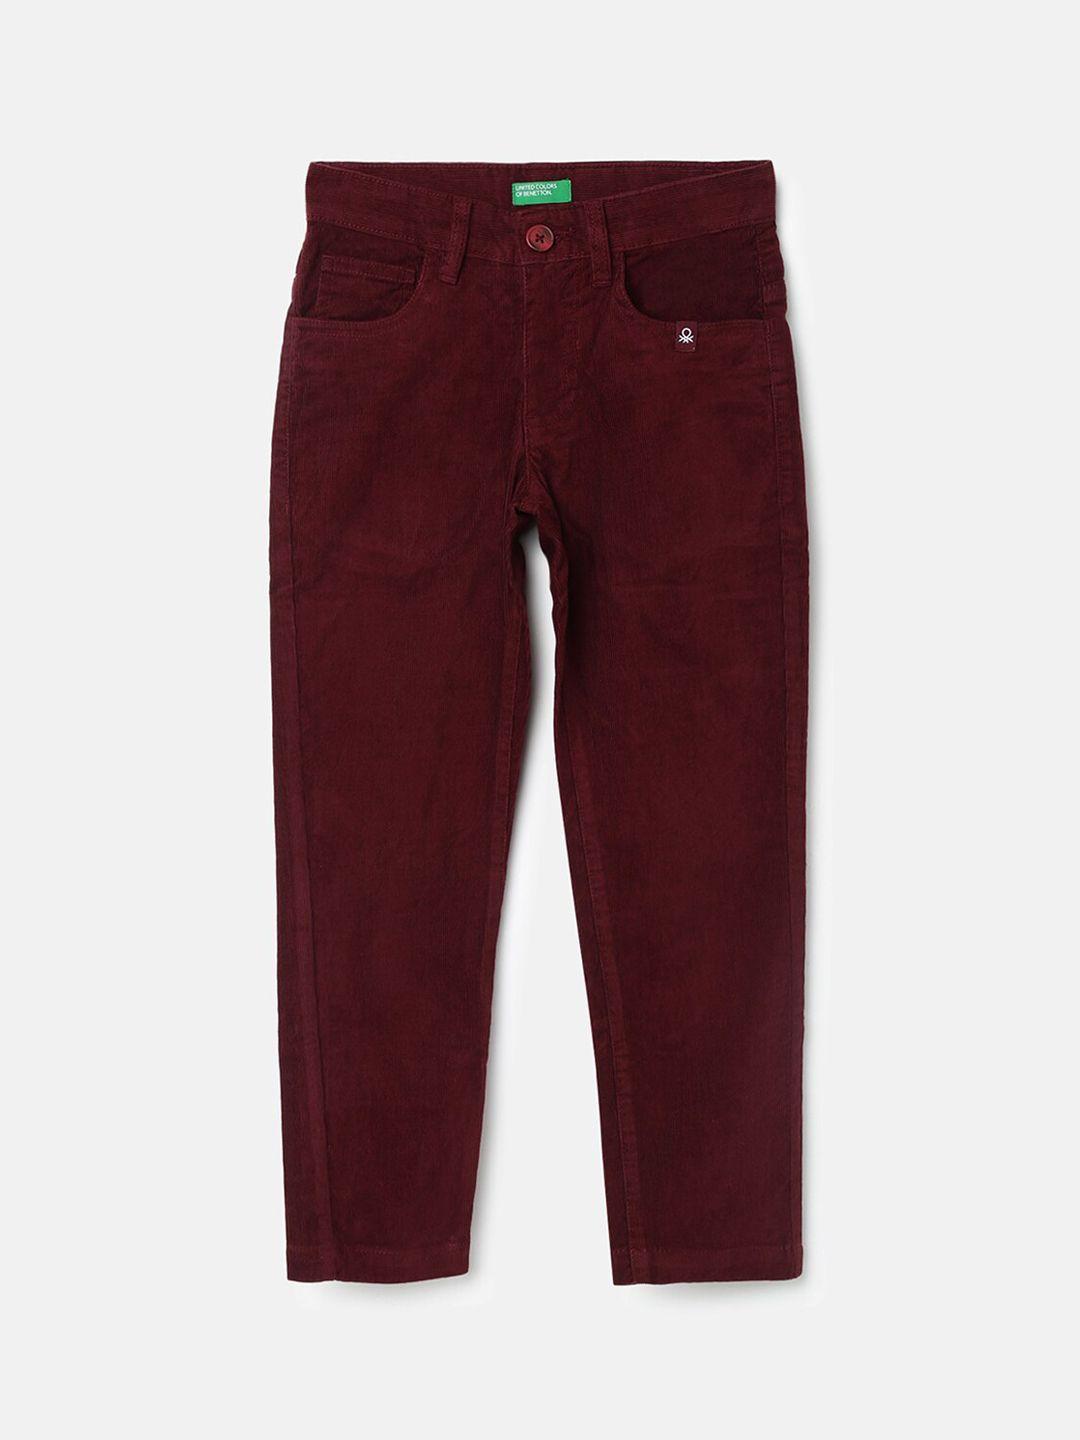 united-colors-of-benetton-boys-maroon-slim-fit-cotton-trouser